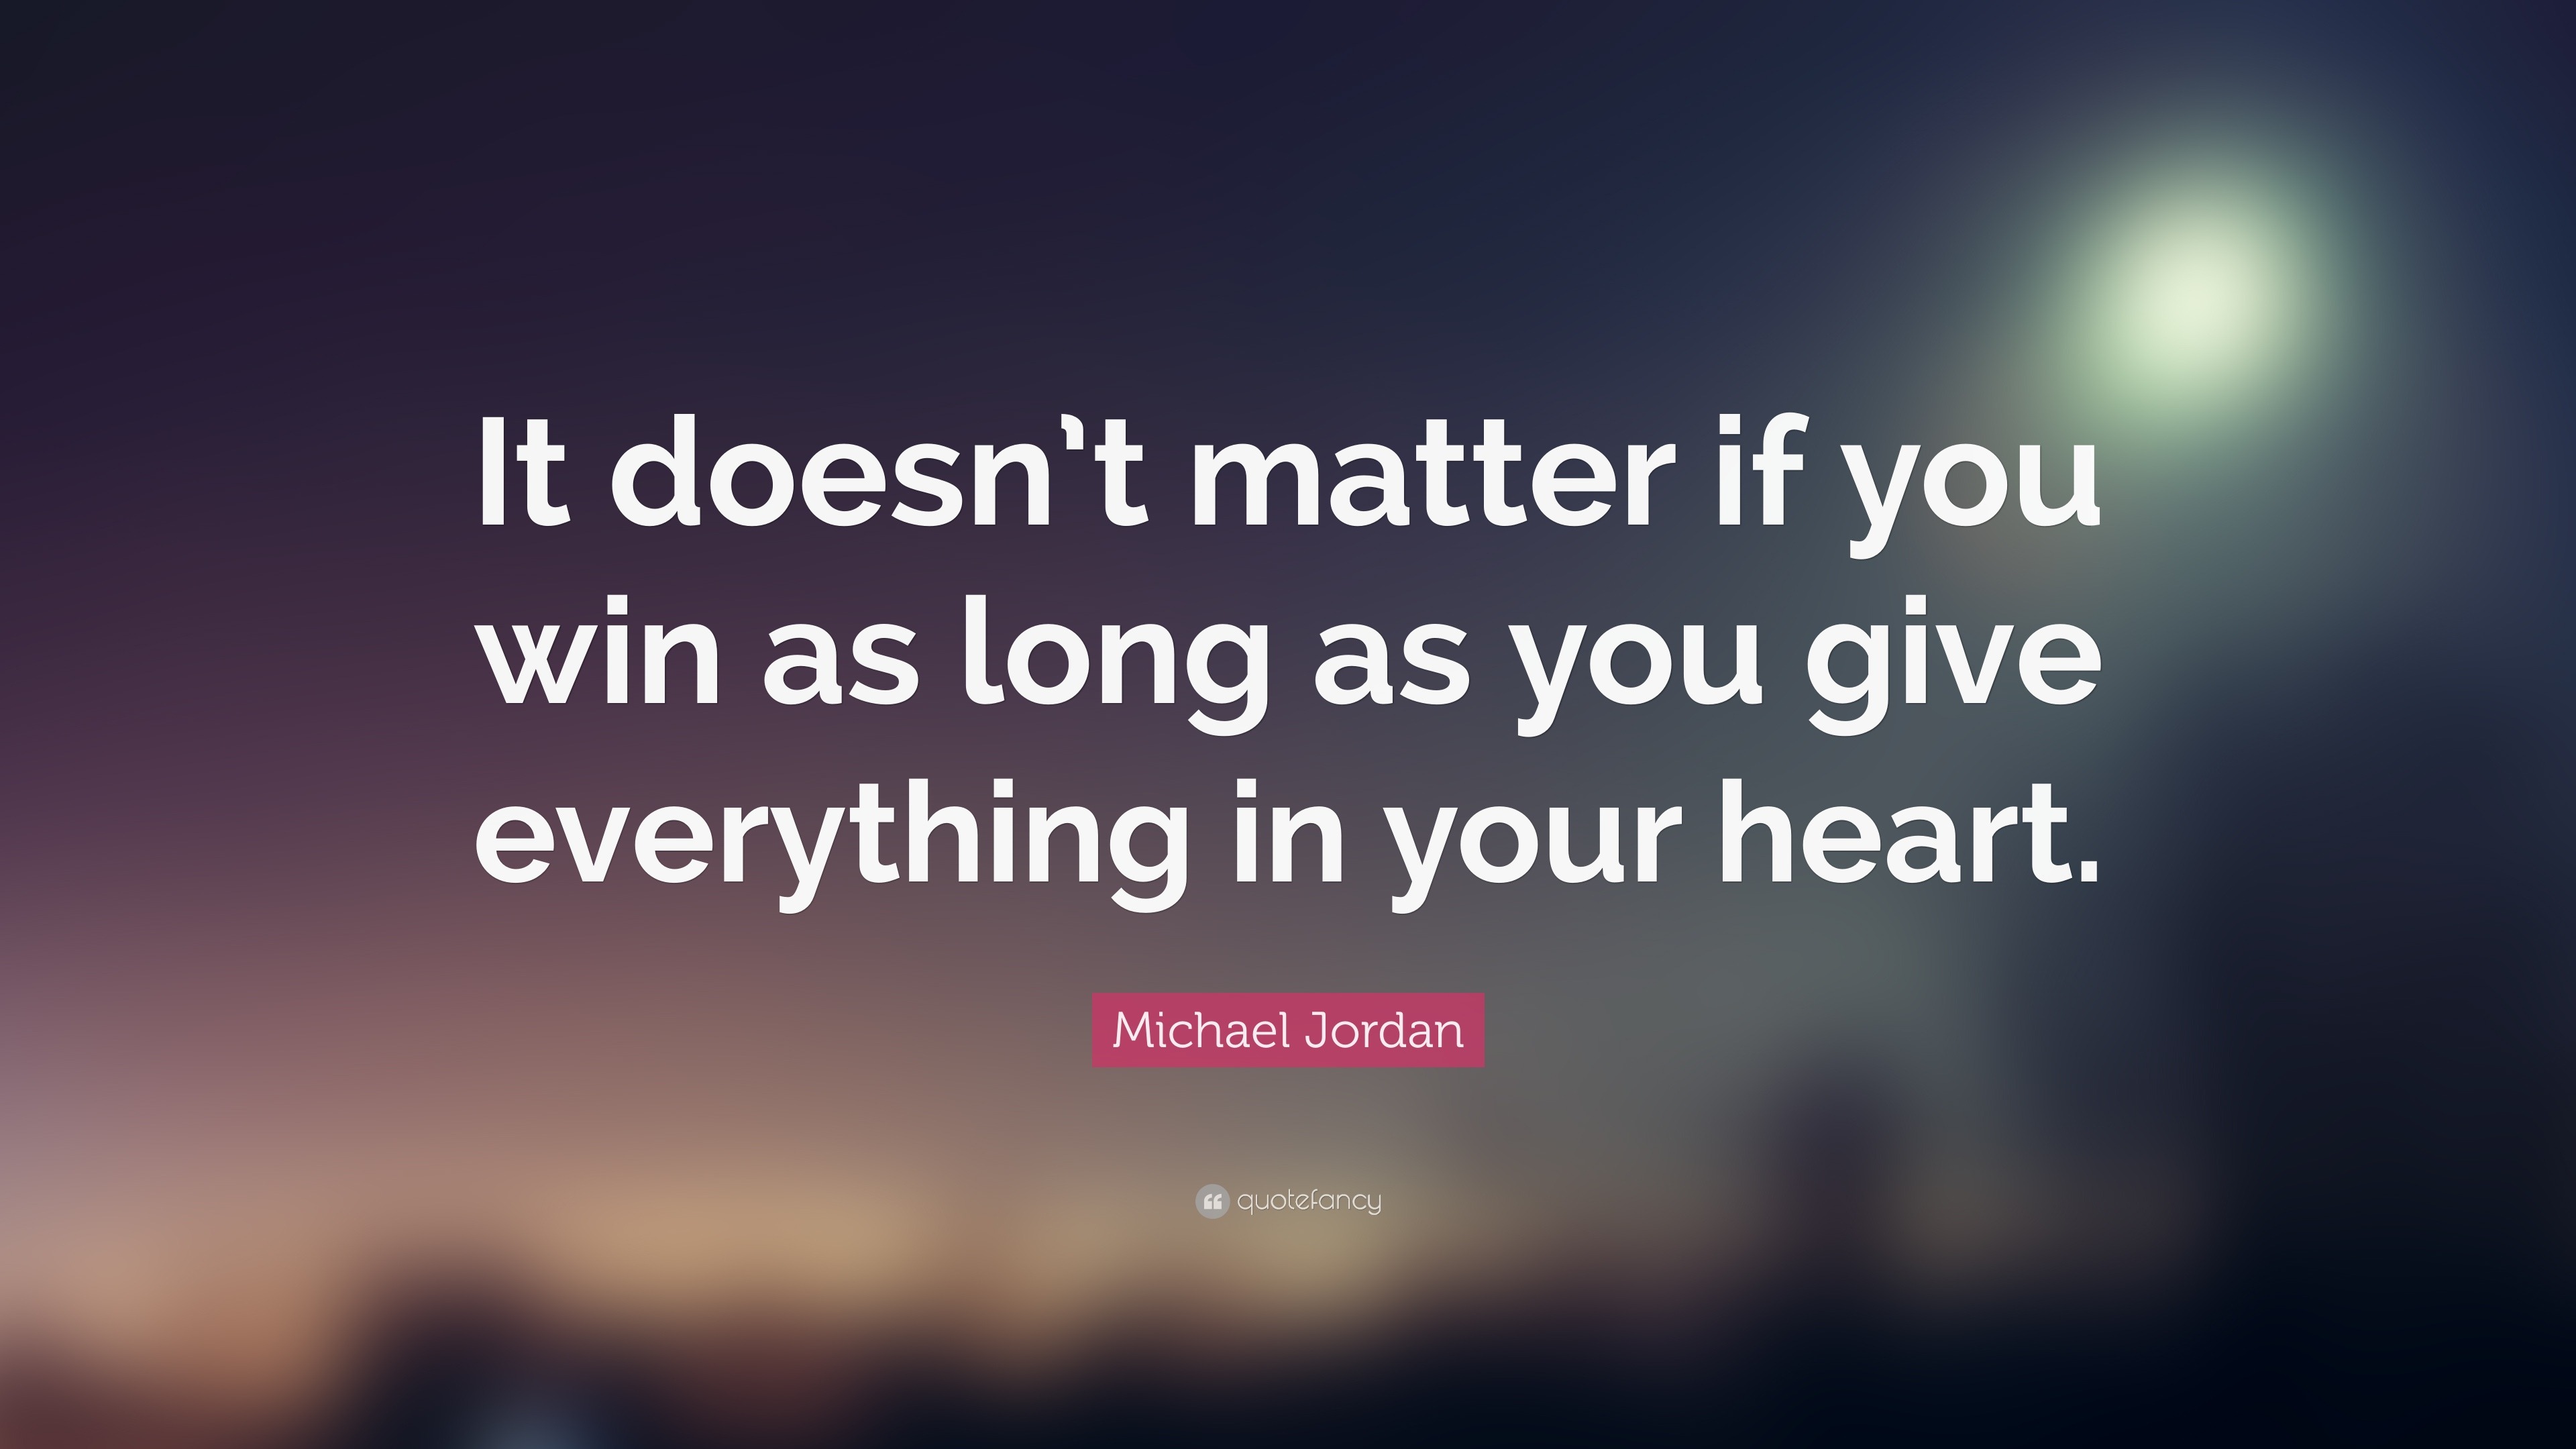 Michael Jordan Quote It Doesn T Matter If You Win As Long As You Give Everything